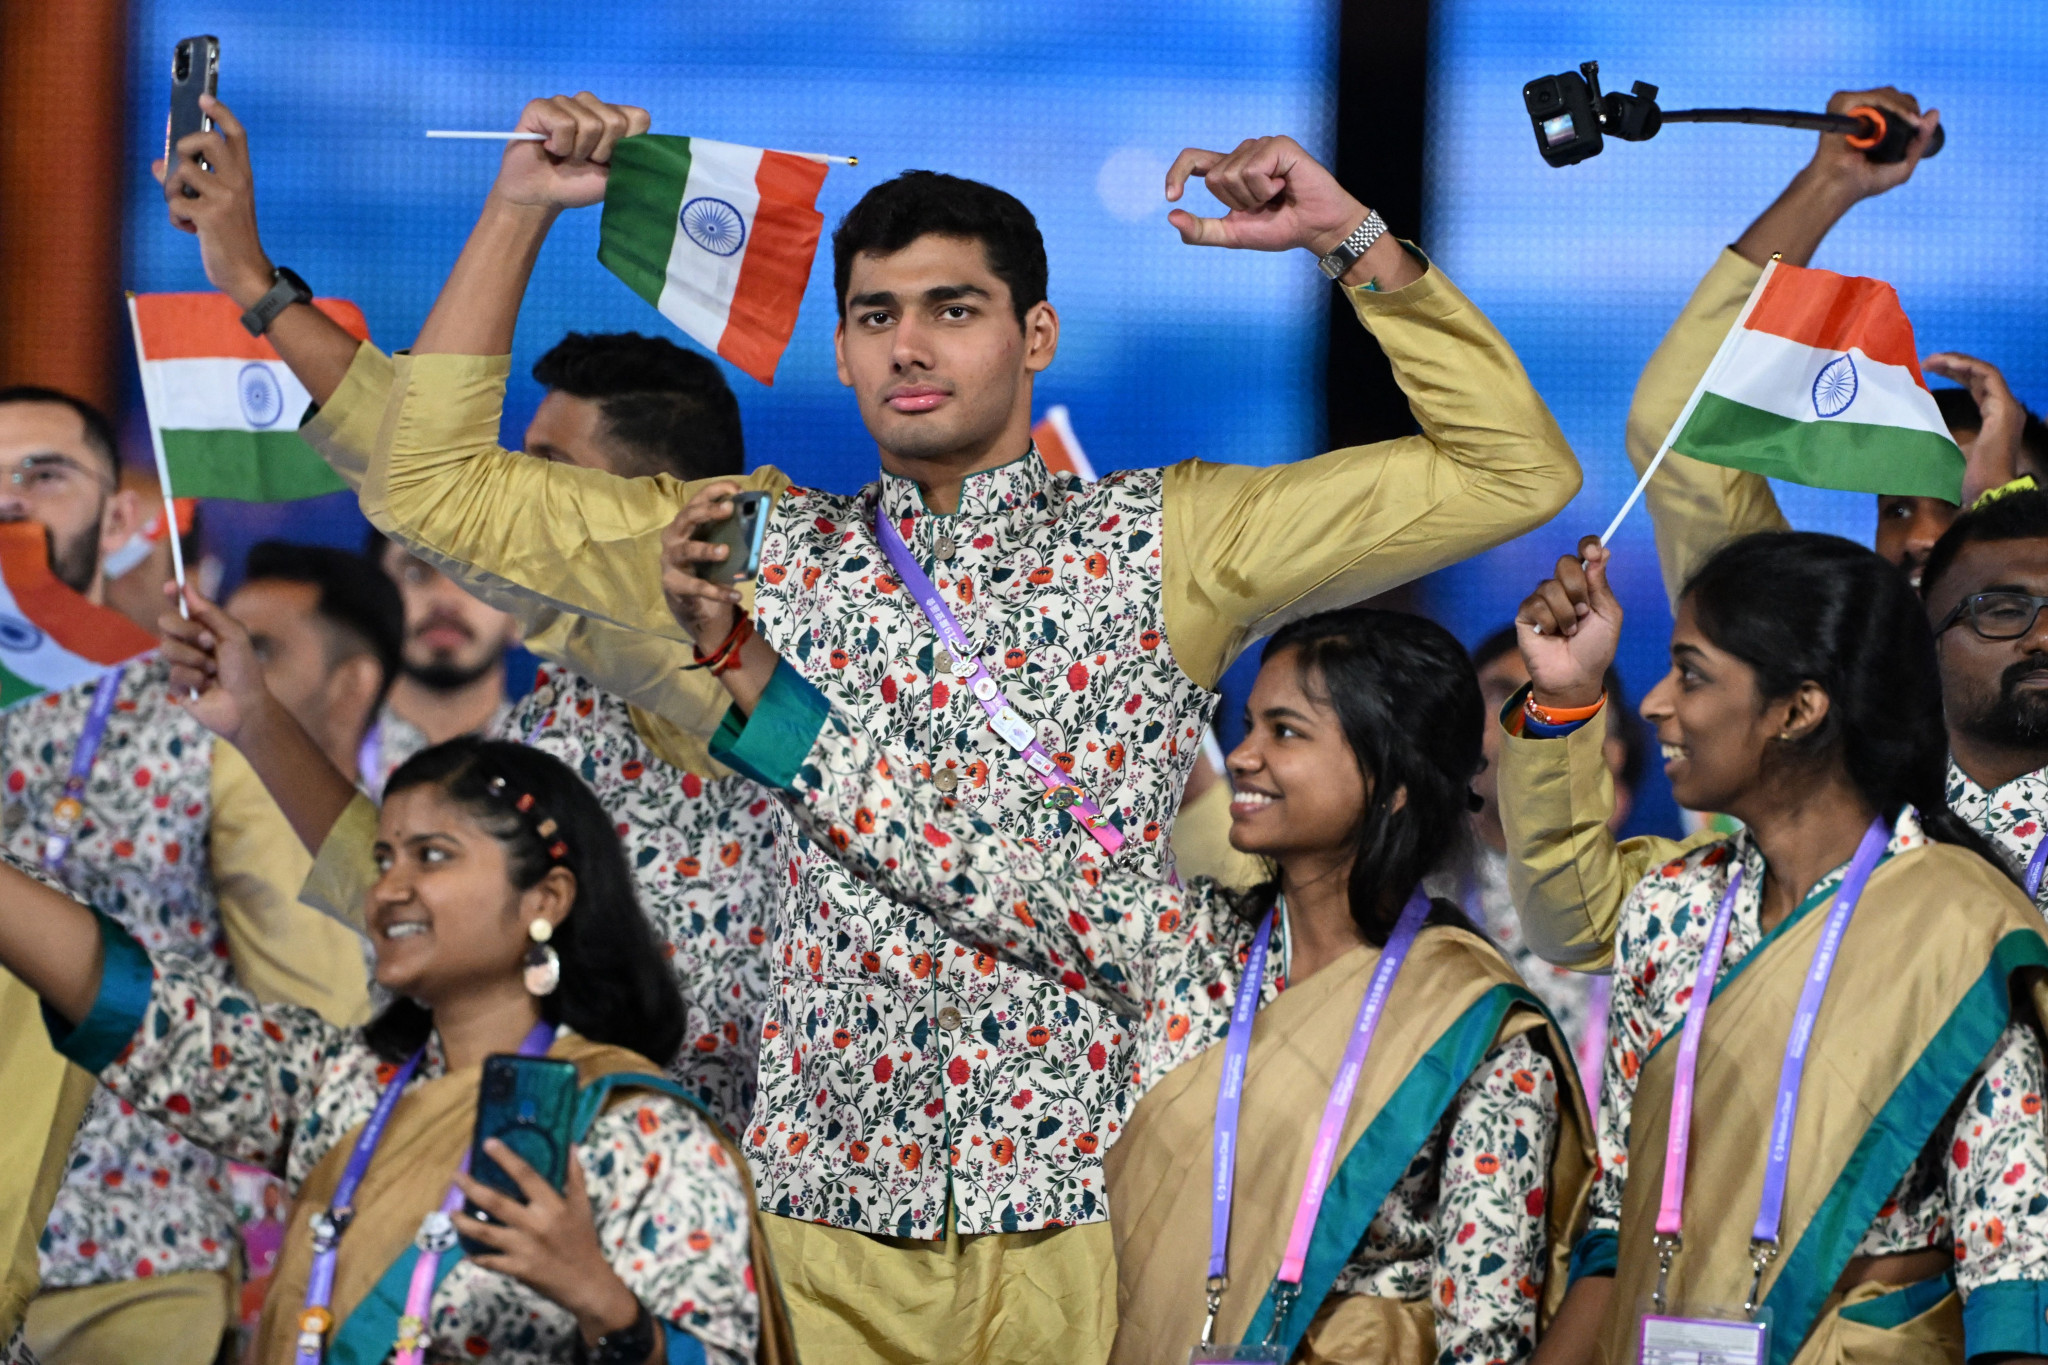 India participated in the Opening Ceremony against the background of tension betwen the country and China ©Getty Images